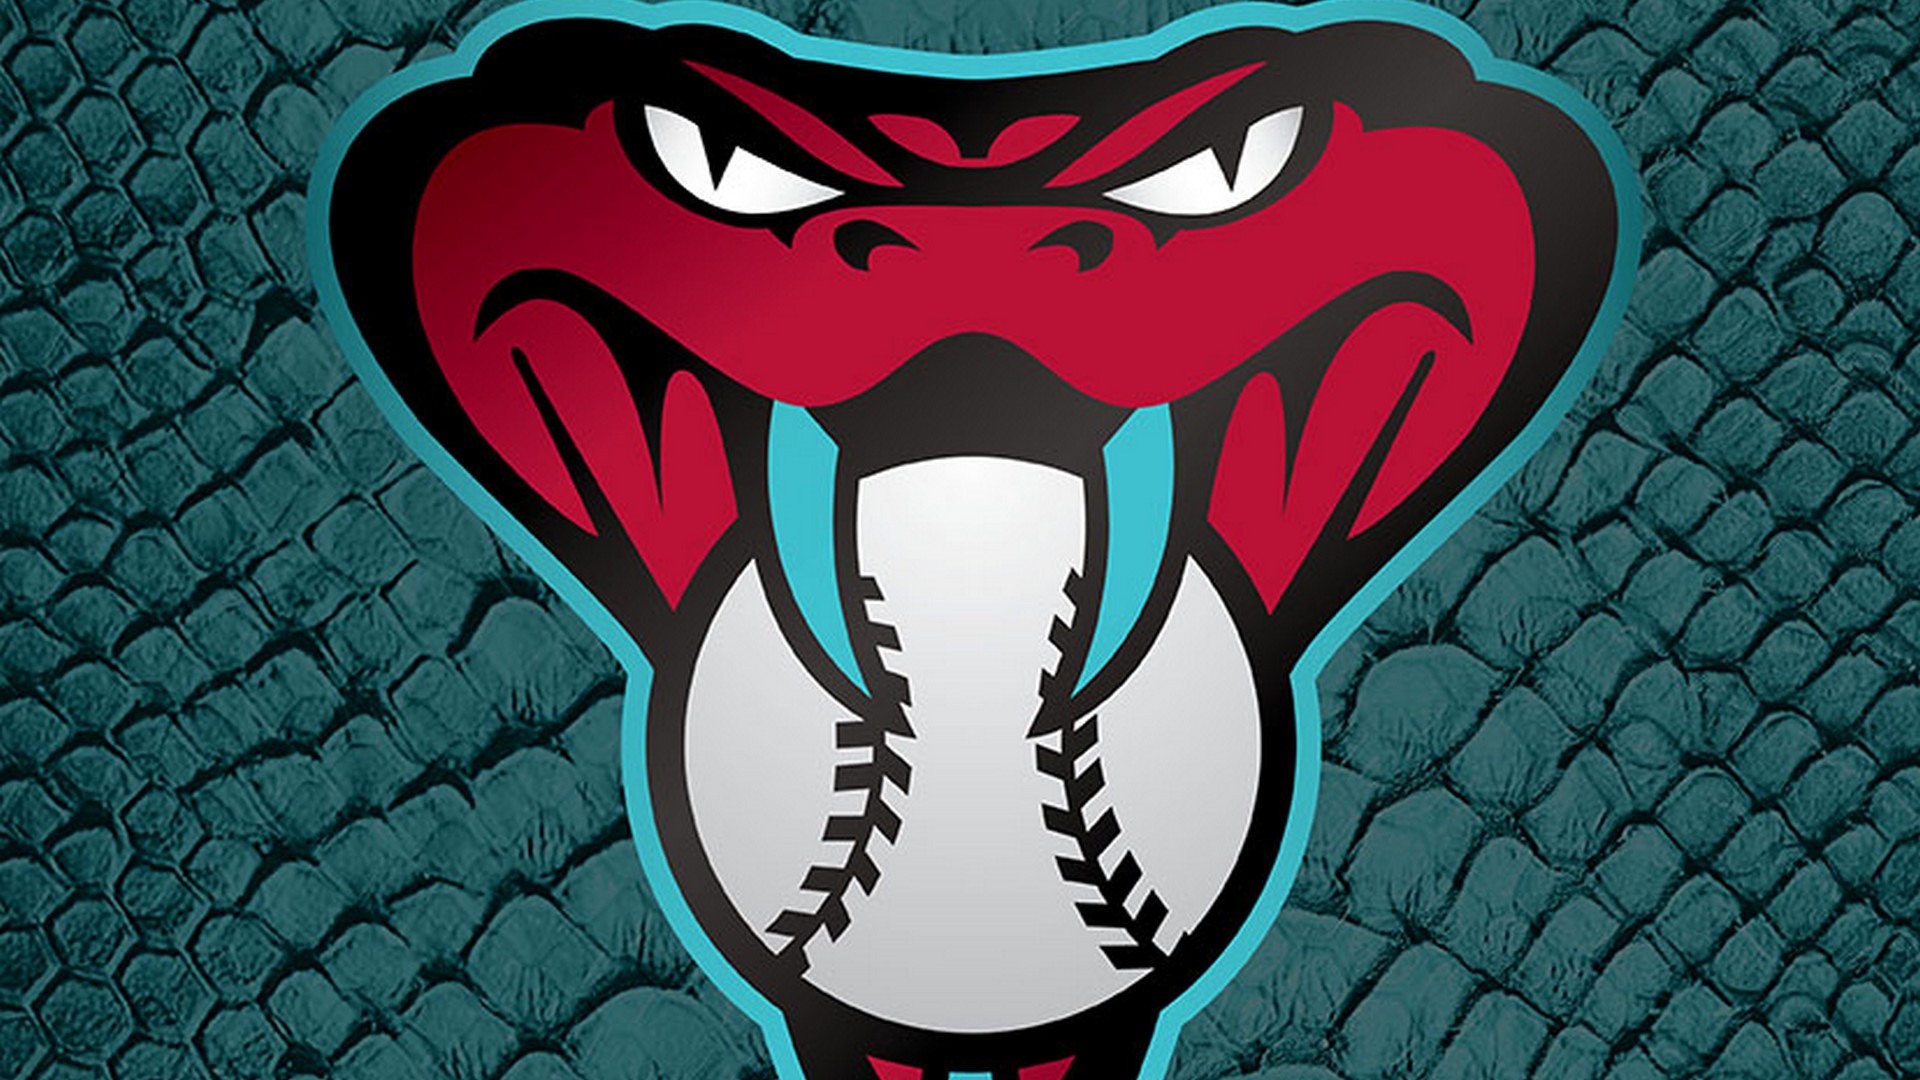 Arizona Diamondbacks MLB Wallpaper with high-resolution 1920x1080 pixel. You can use this wallpaper for Mac Desktop Wallpaper, Laptop Screensavers, Android Wallpapers, Tablet or iPhone Home Screen and another mobile phone device